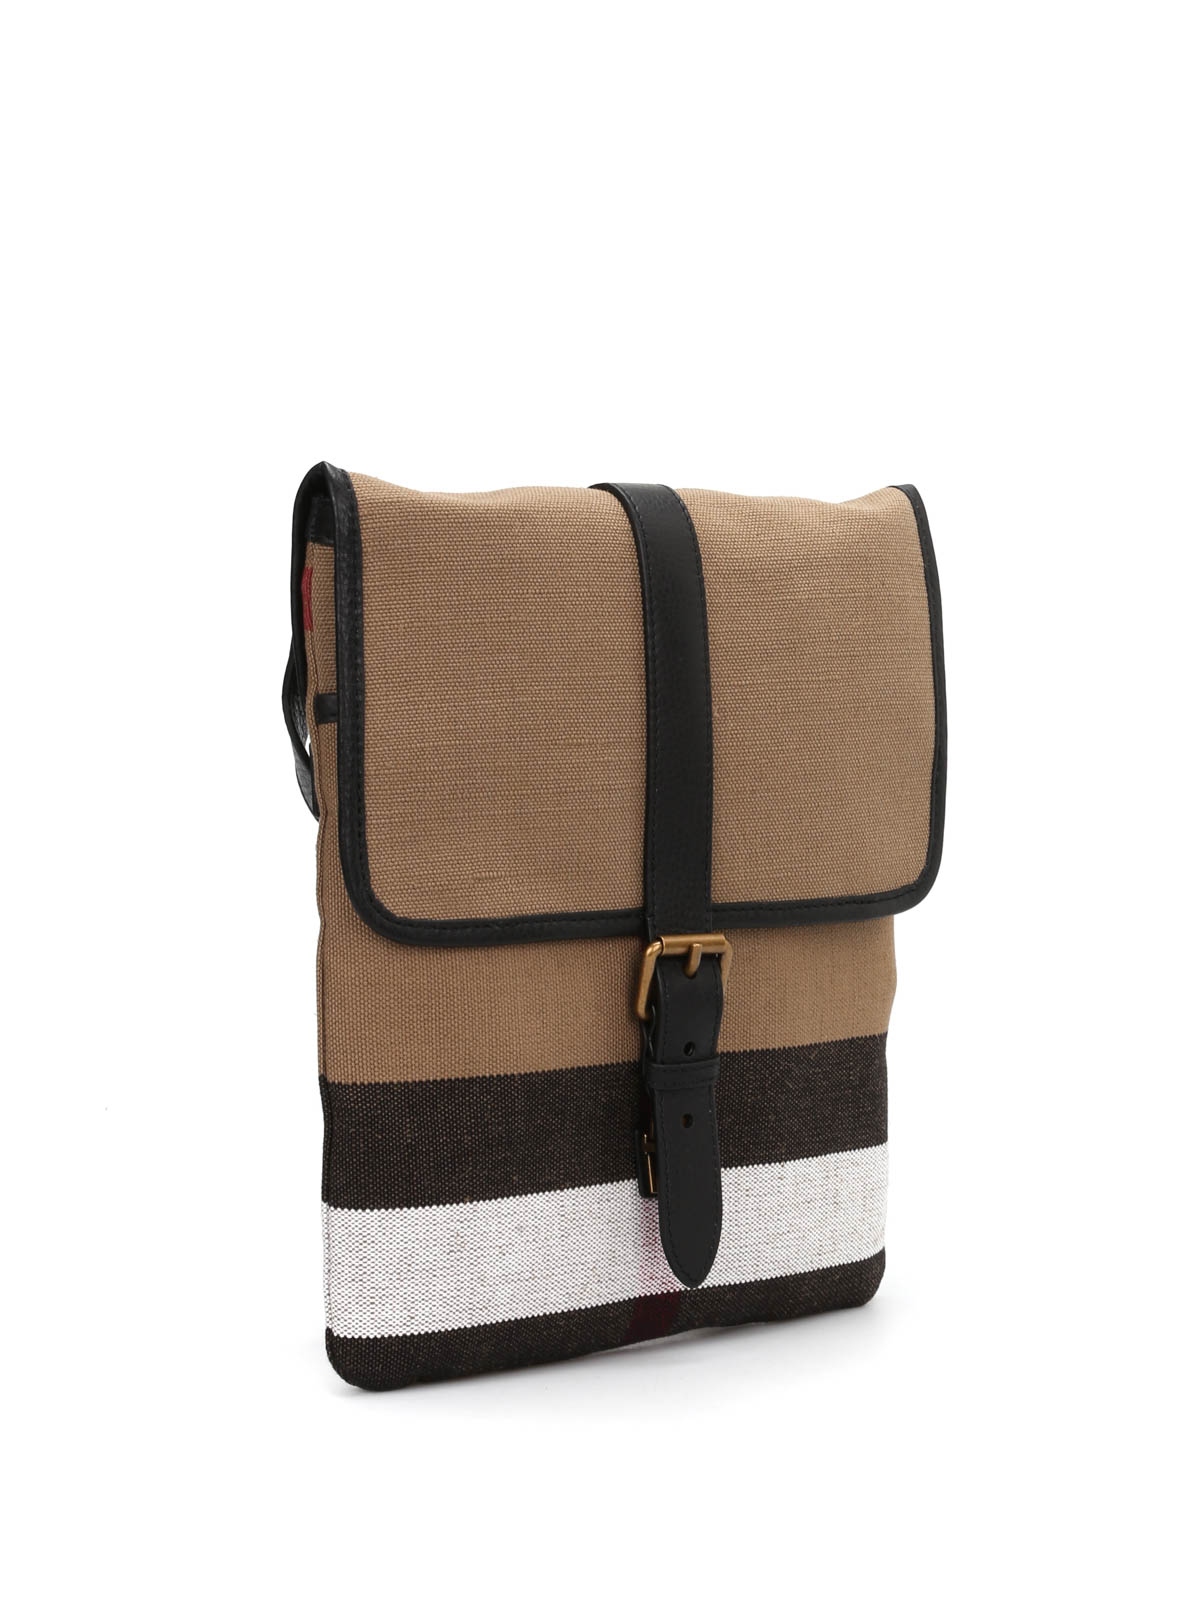 Mens Bags Messenger bags Burberry Wright Checked Canvas Cross-body Bag for Men 